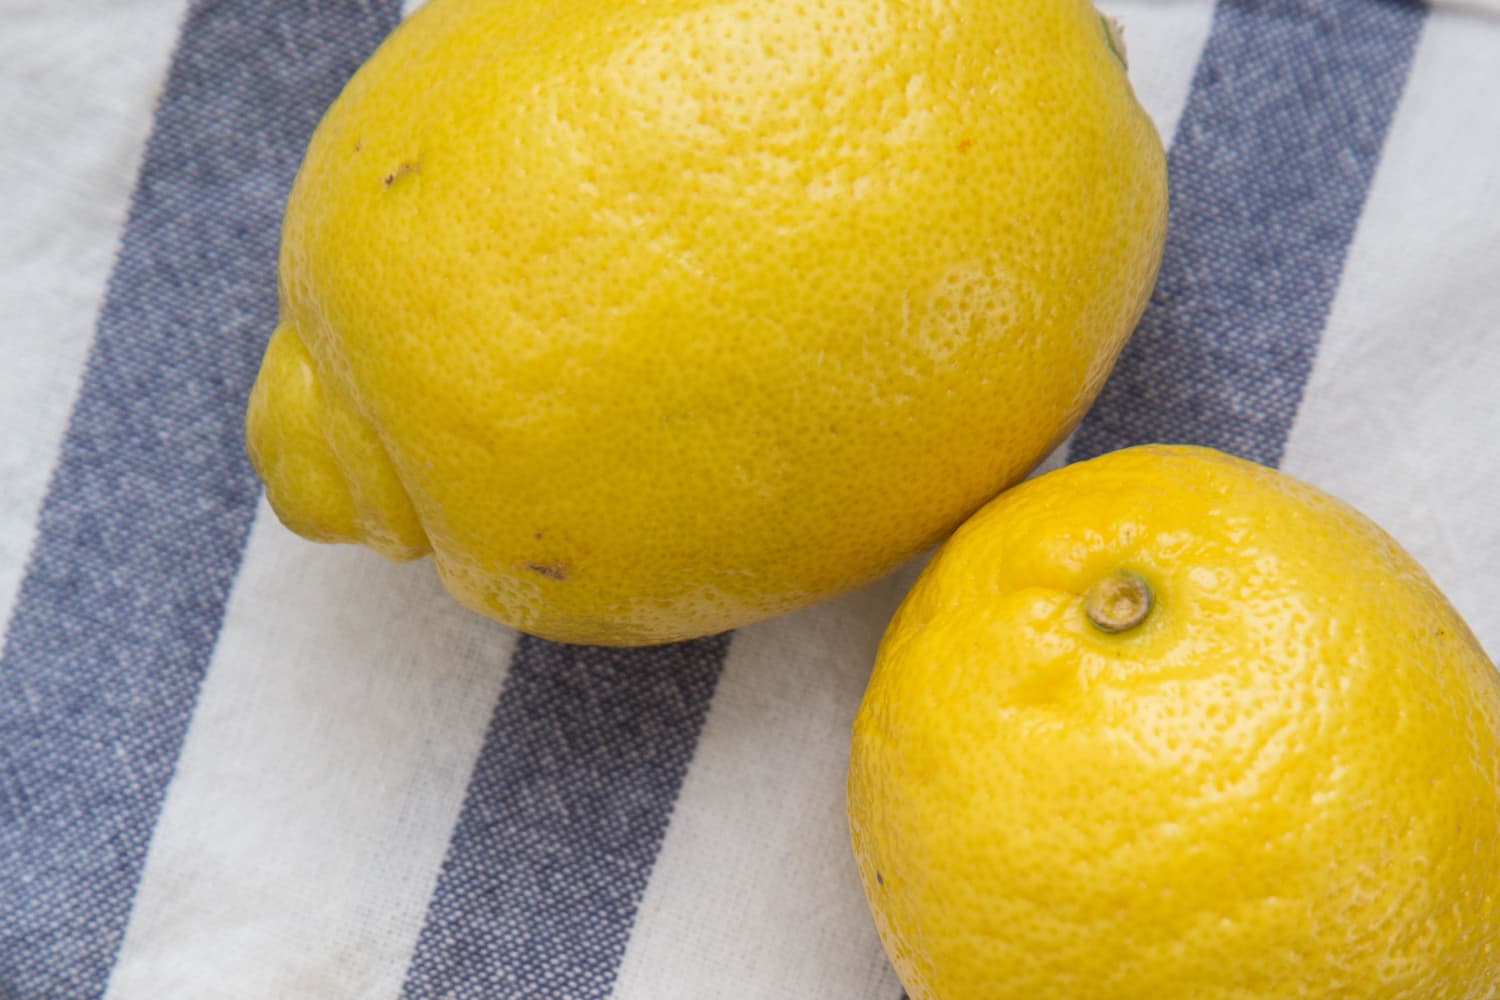 The Ingenious Lemon-Squeezing Hack I've Been Completely Overlooking - The Kitchn